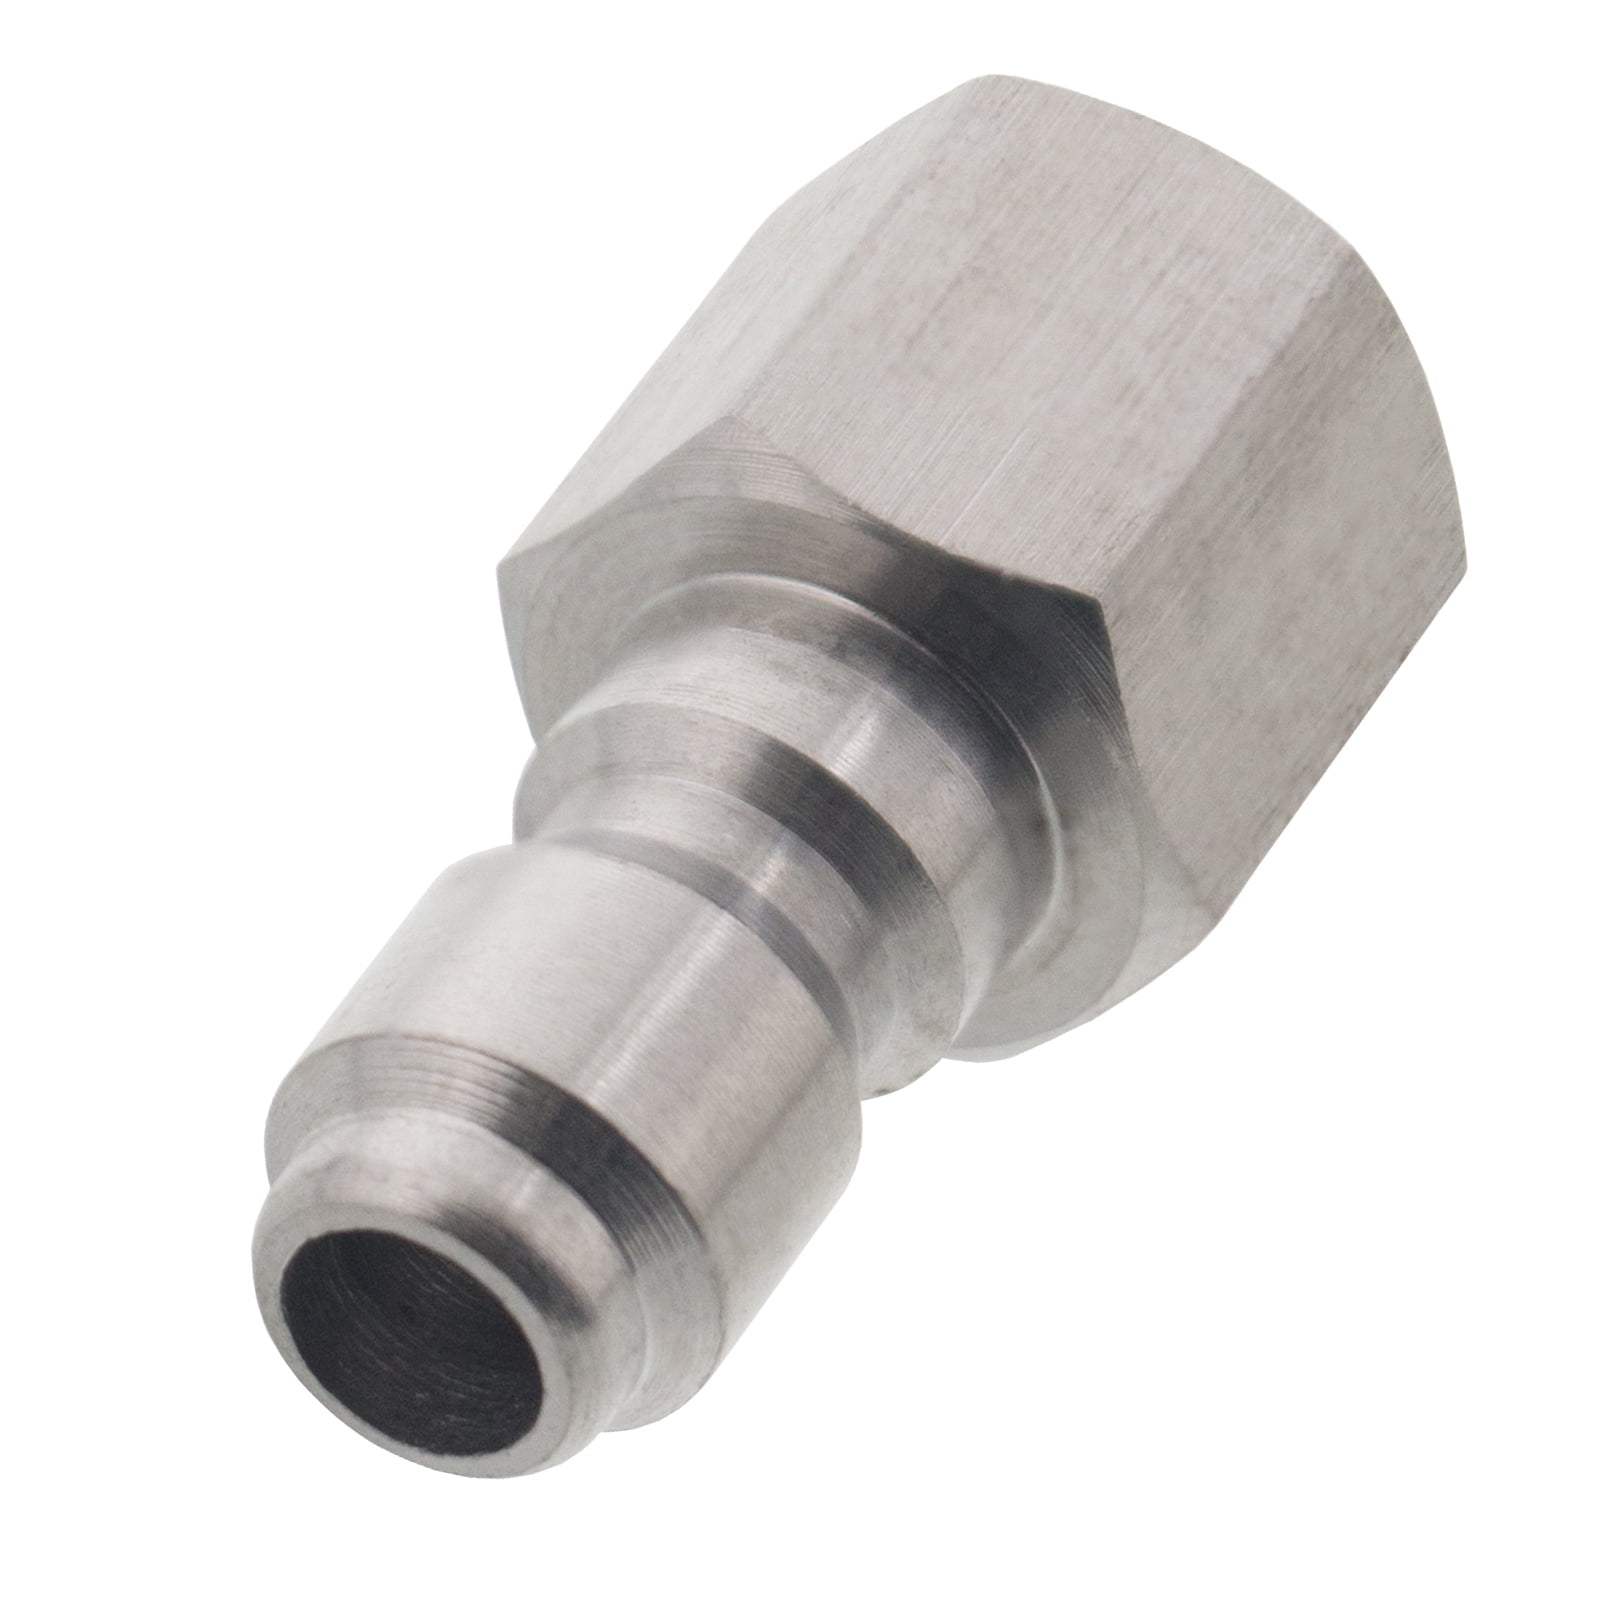 Stainless Steel Power Pressure Washer 1/4" FPT Quick Connect Plug Hose Connector